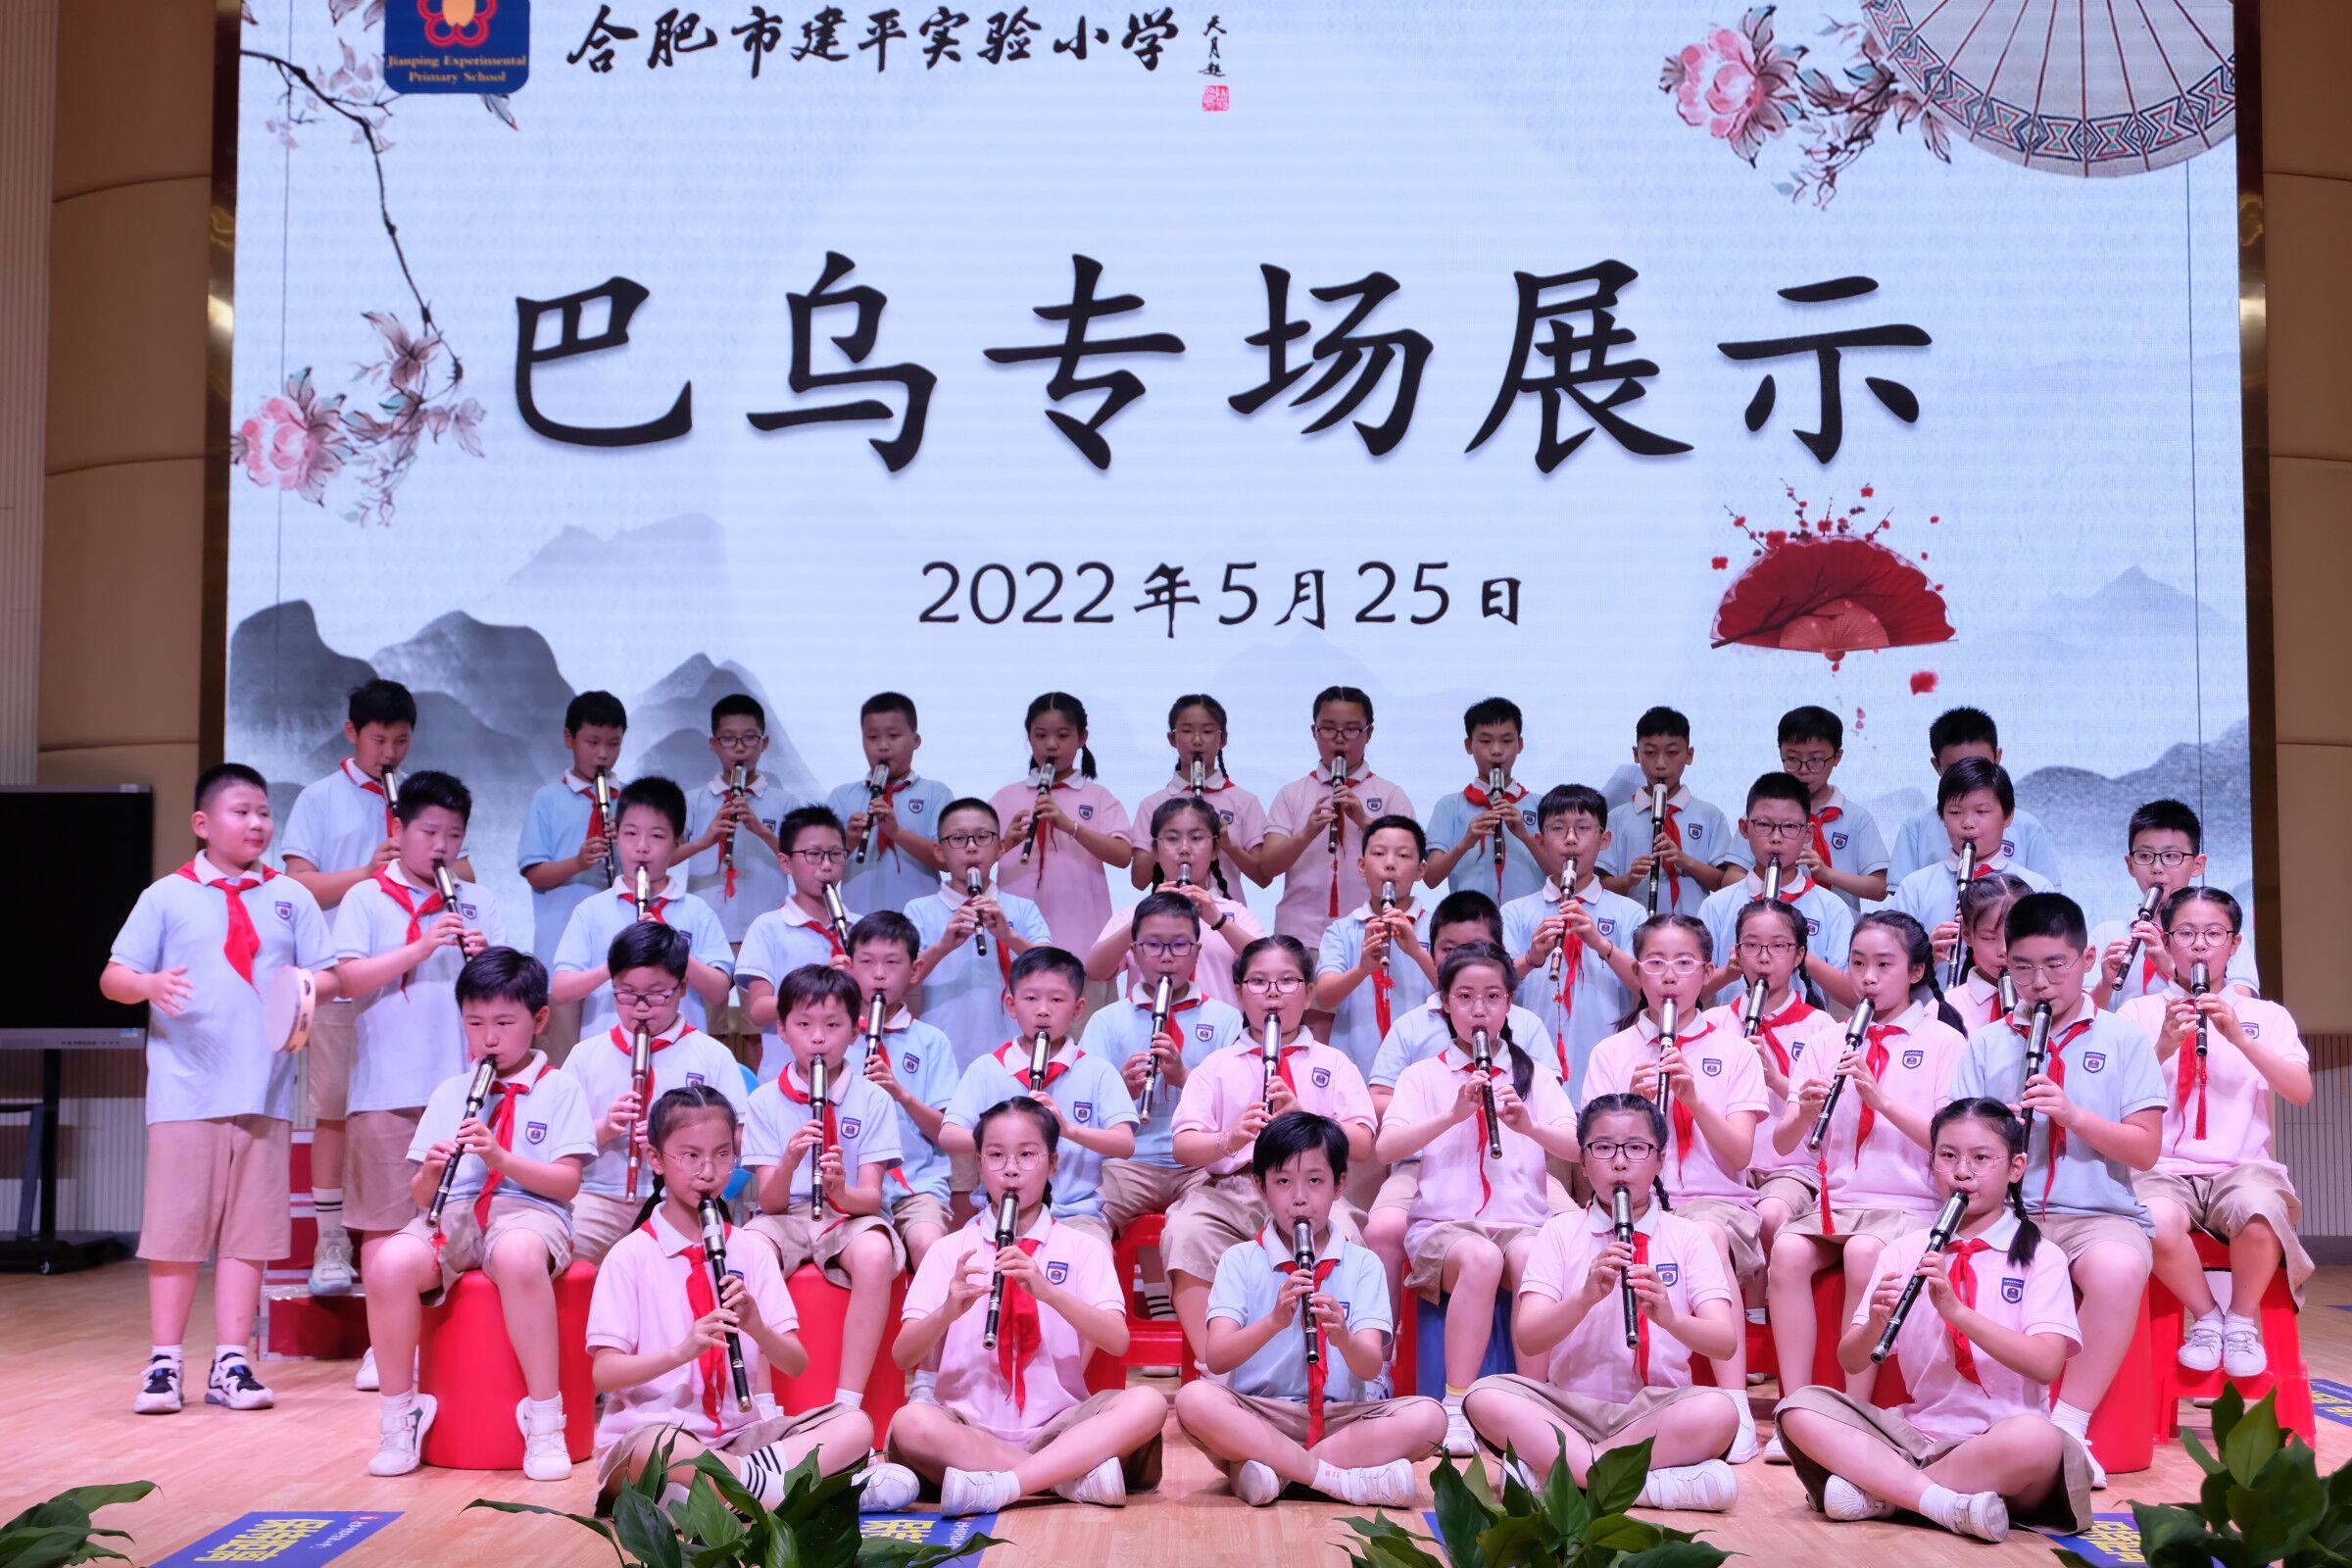 The 4th School Art Festival of Jianping Experimental Primary School - Bawu Special Exhibition